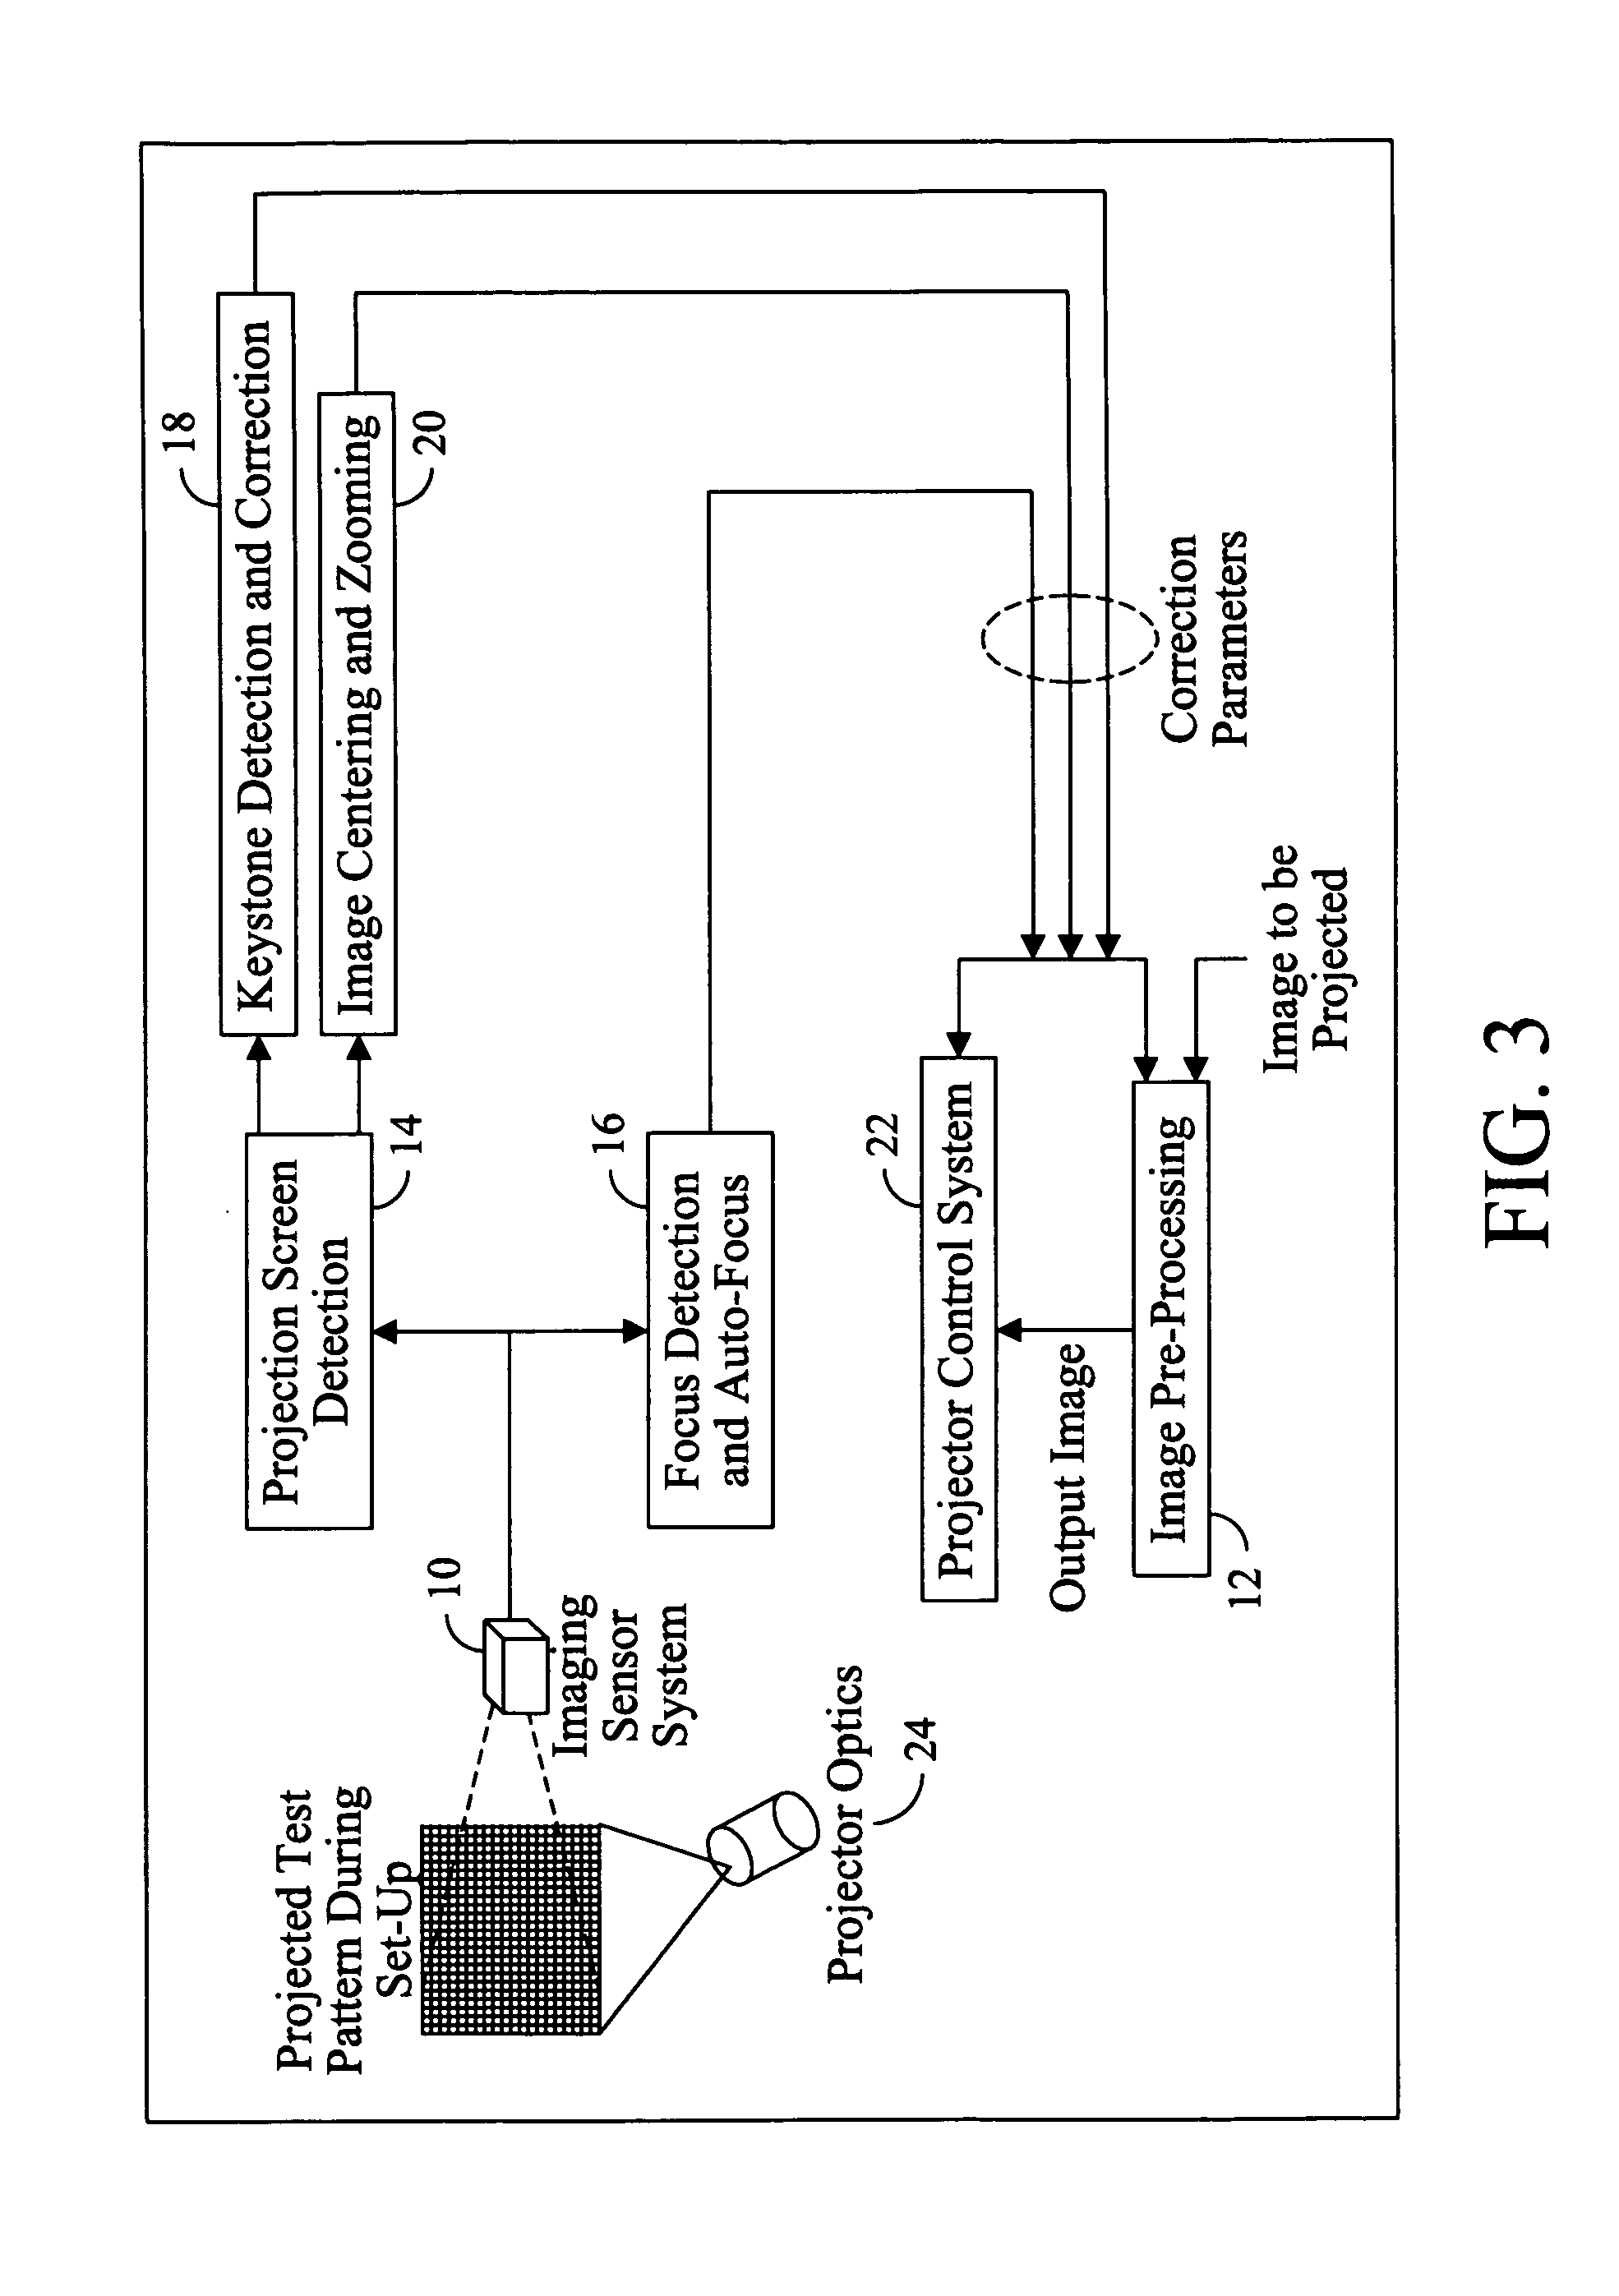 Projection system with corrective image transformation